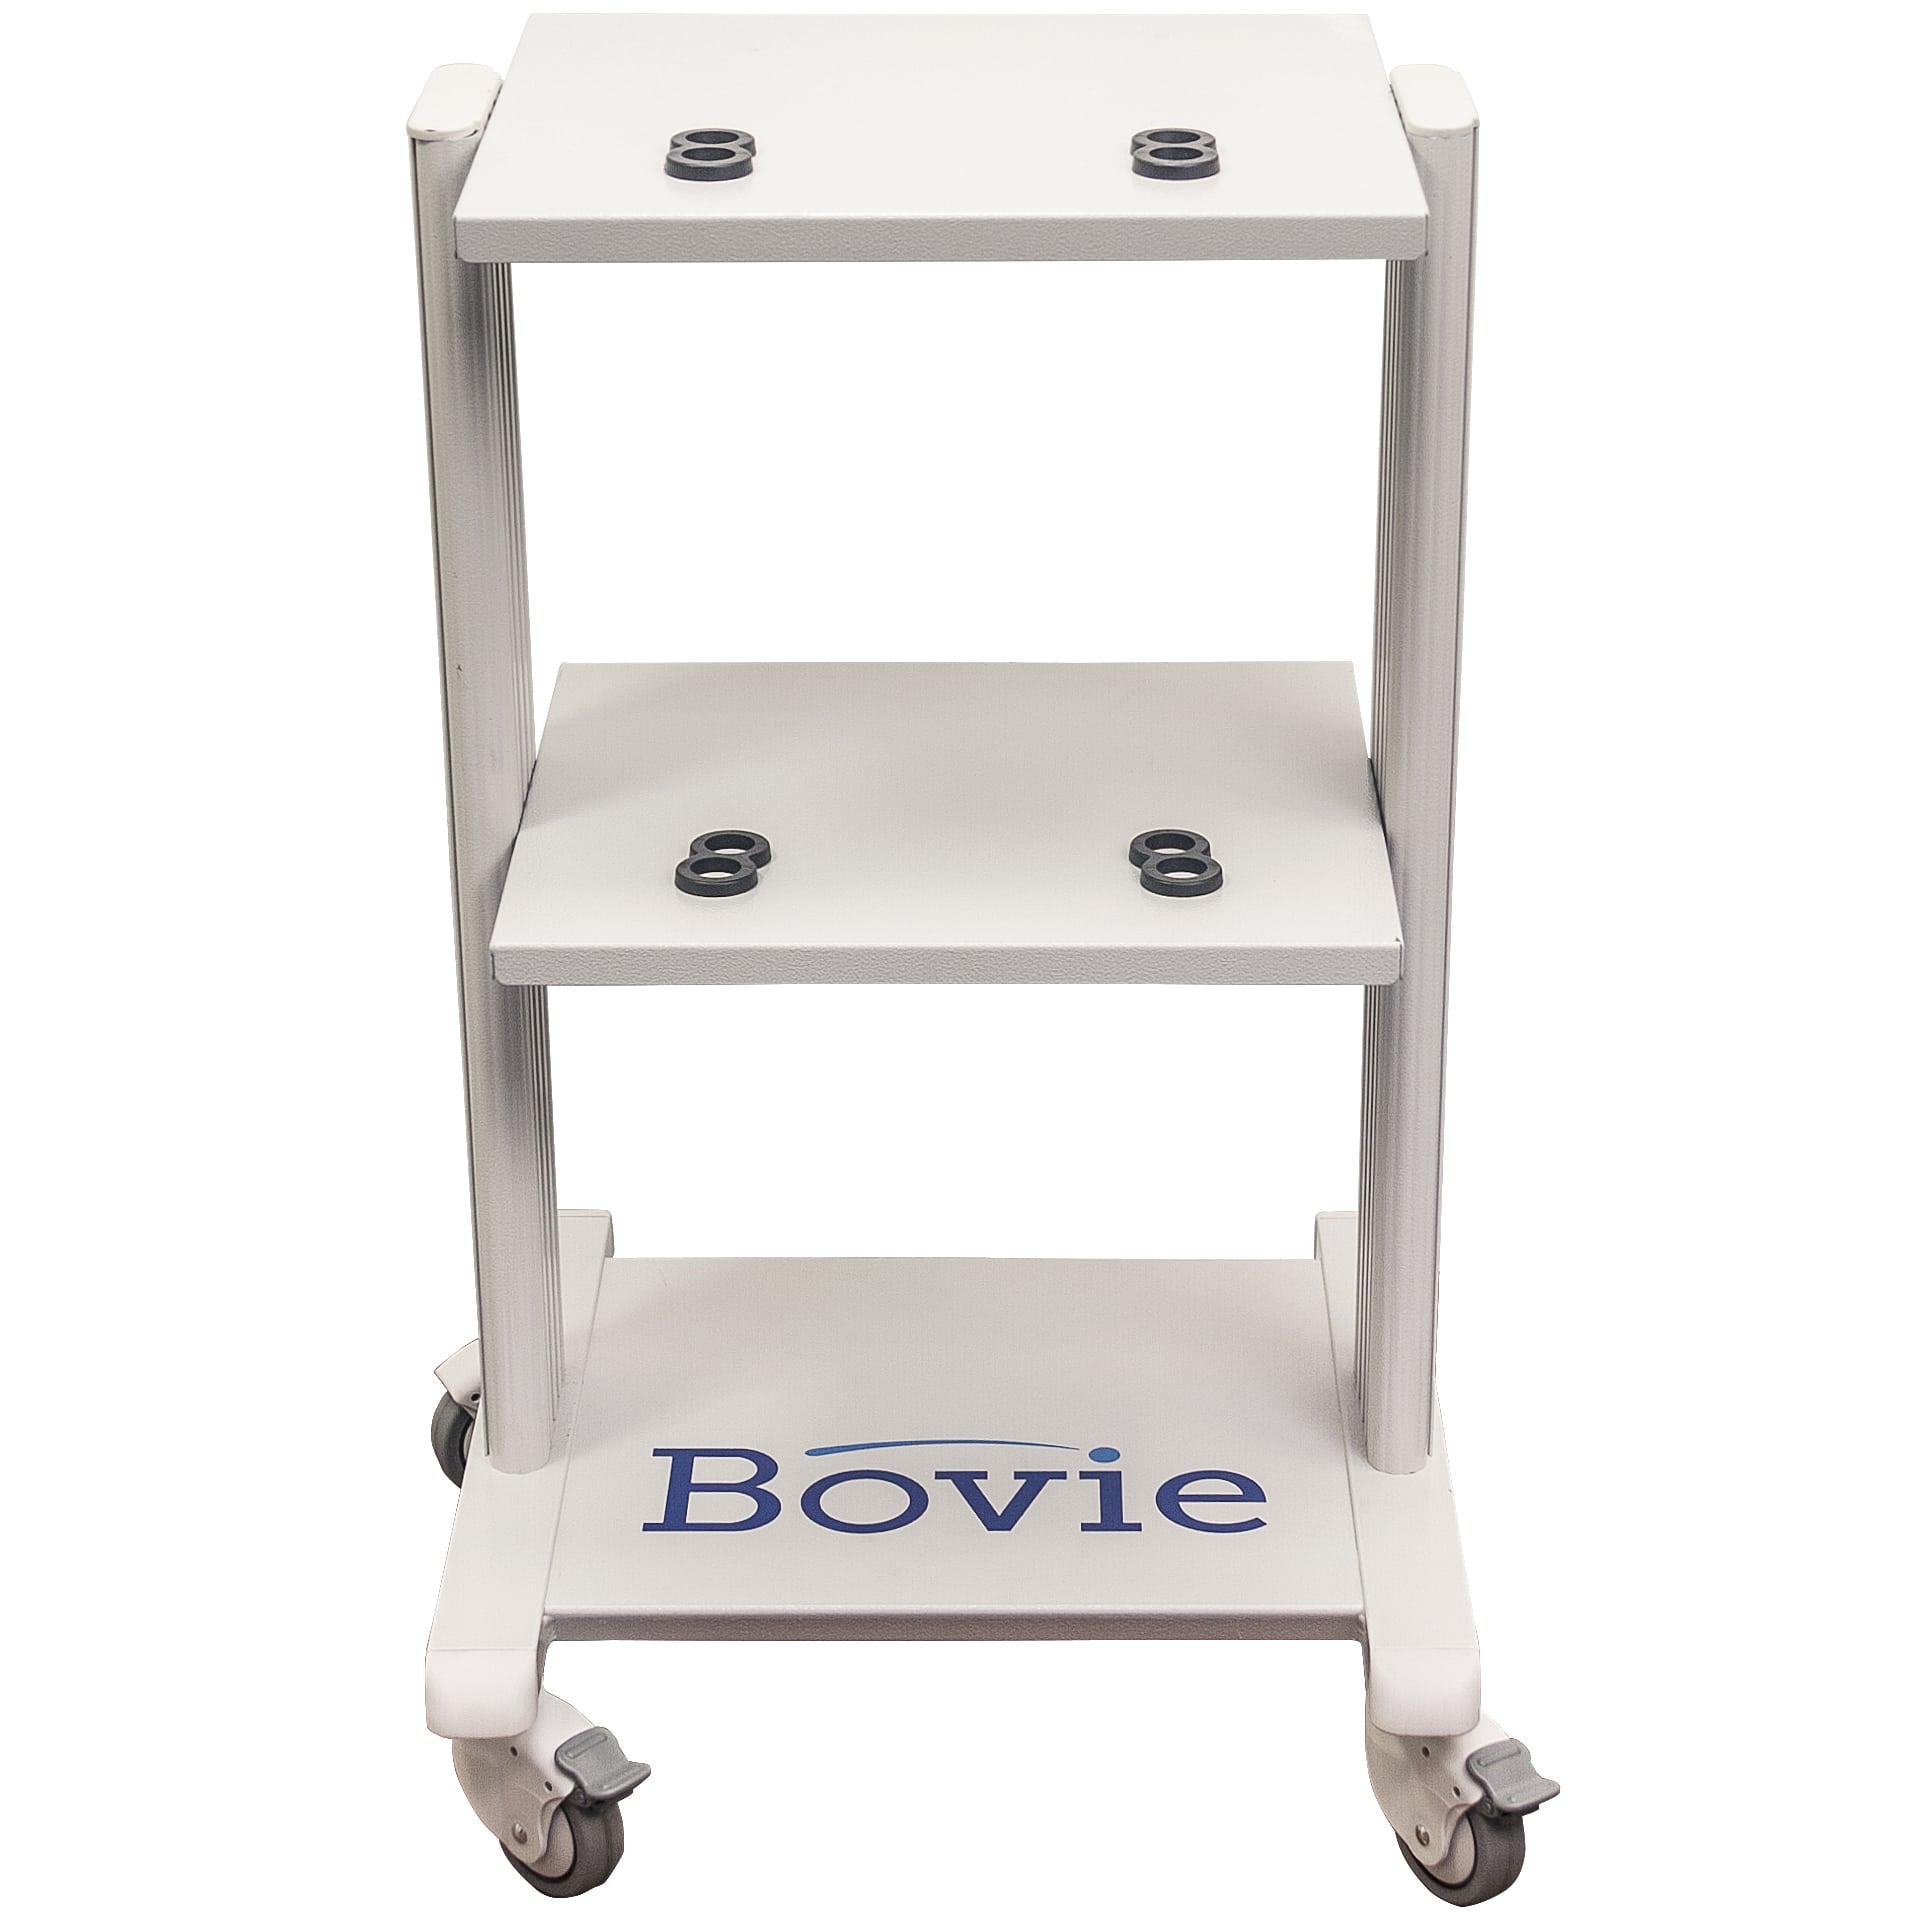 Bovie Multi-Tiered Mobile Stand